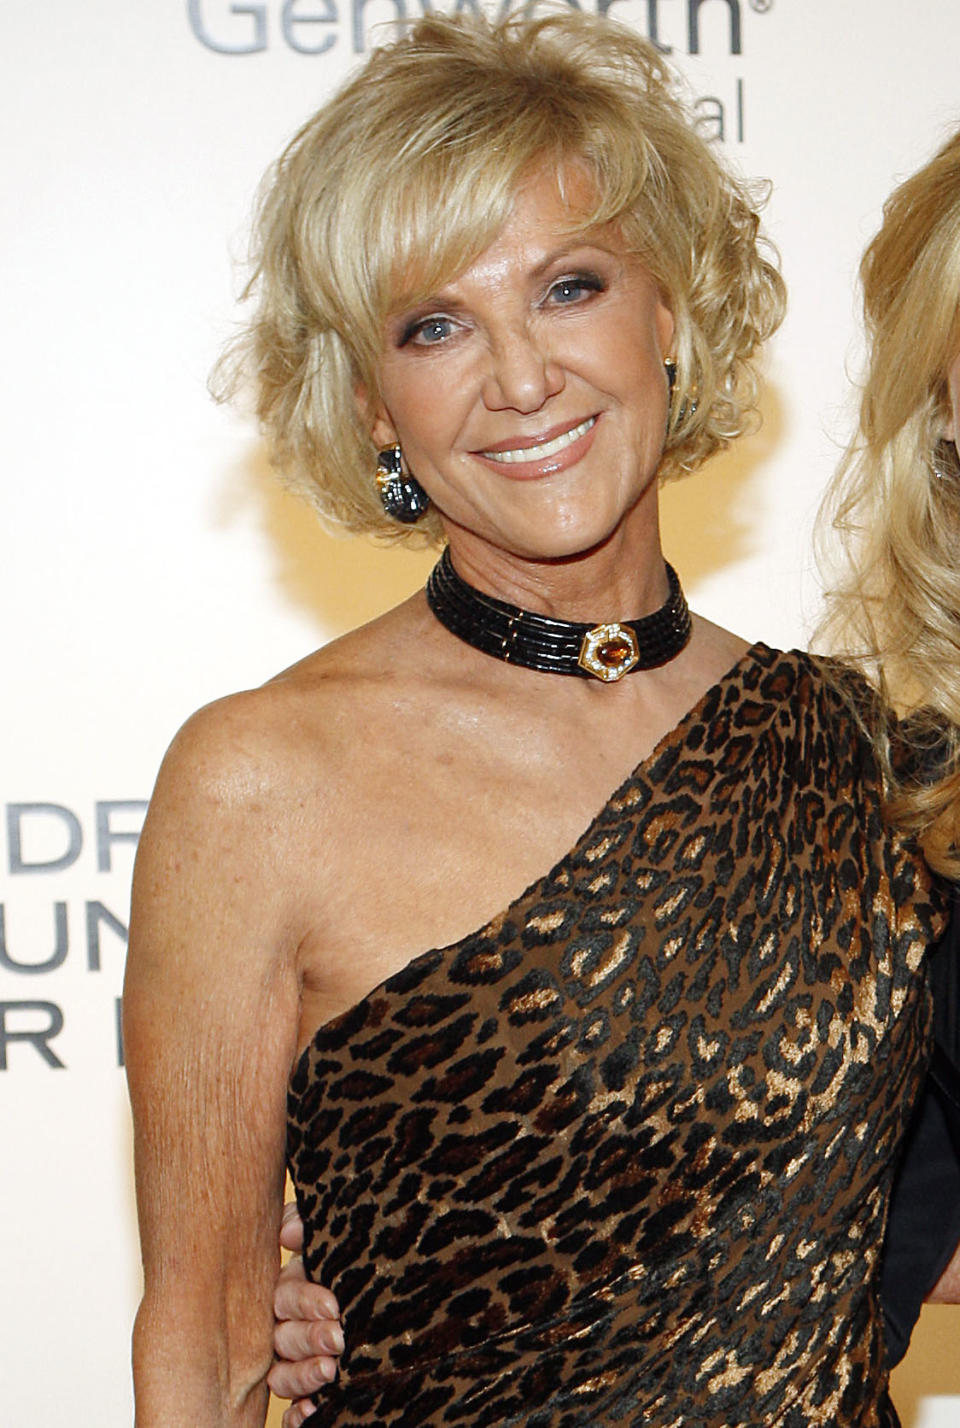 FILE-In this Saturday, Sept. 26, 2009, file photo, Elaine Wynn, arrives at the Andre Agassi Foundation for Education's Grand Slam for Children benefit concert at Wynn Las Vegas hotel and casino, in Las Vegas. Elaine Wynn, 69, has a net worth $1.4 billion, and ranks 328th in Forbes' 2012 400 list. With now-ex-husband Steve, Wynn founded a casino empire that included The Mirage, Bellagio, Wynn and Encore resorts, among others. (AP Photo/Isaac Brekken)